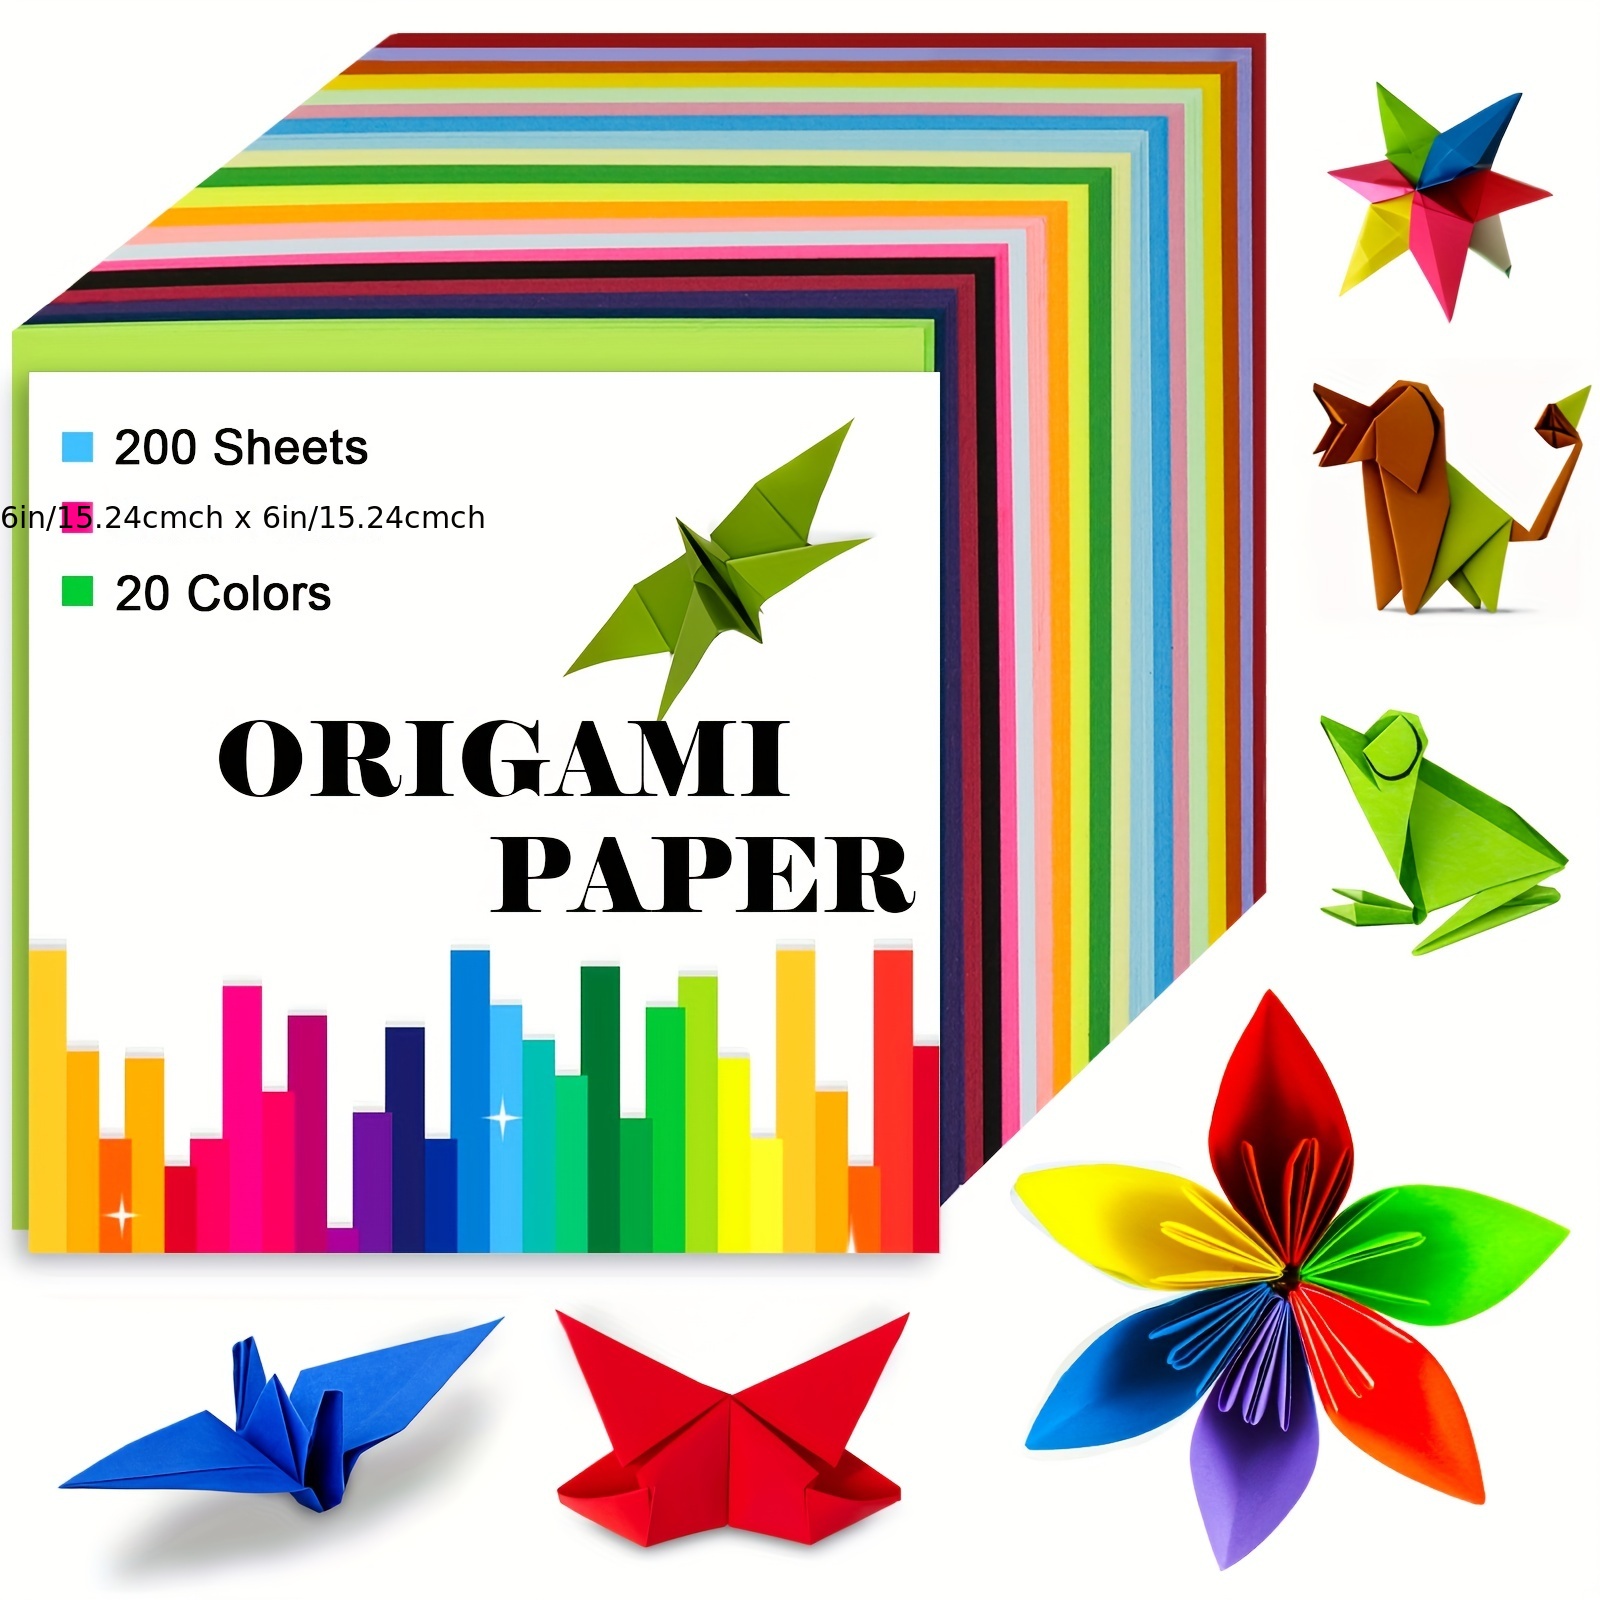 Japanese Washi Origami Paper 500 Sheets, 10 Vivid Colors, Colors Make  Colorful and Easy Origami,6 Inch Square Sheet, for Kids & Adults, Papers,  Arts